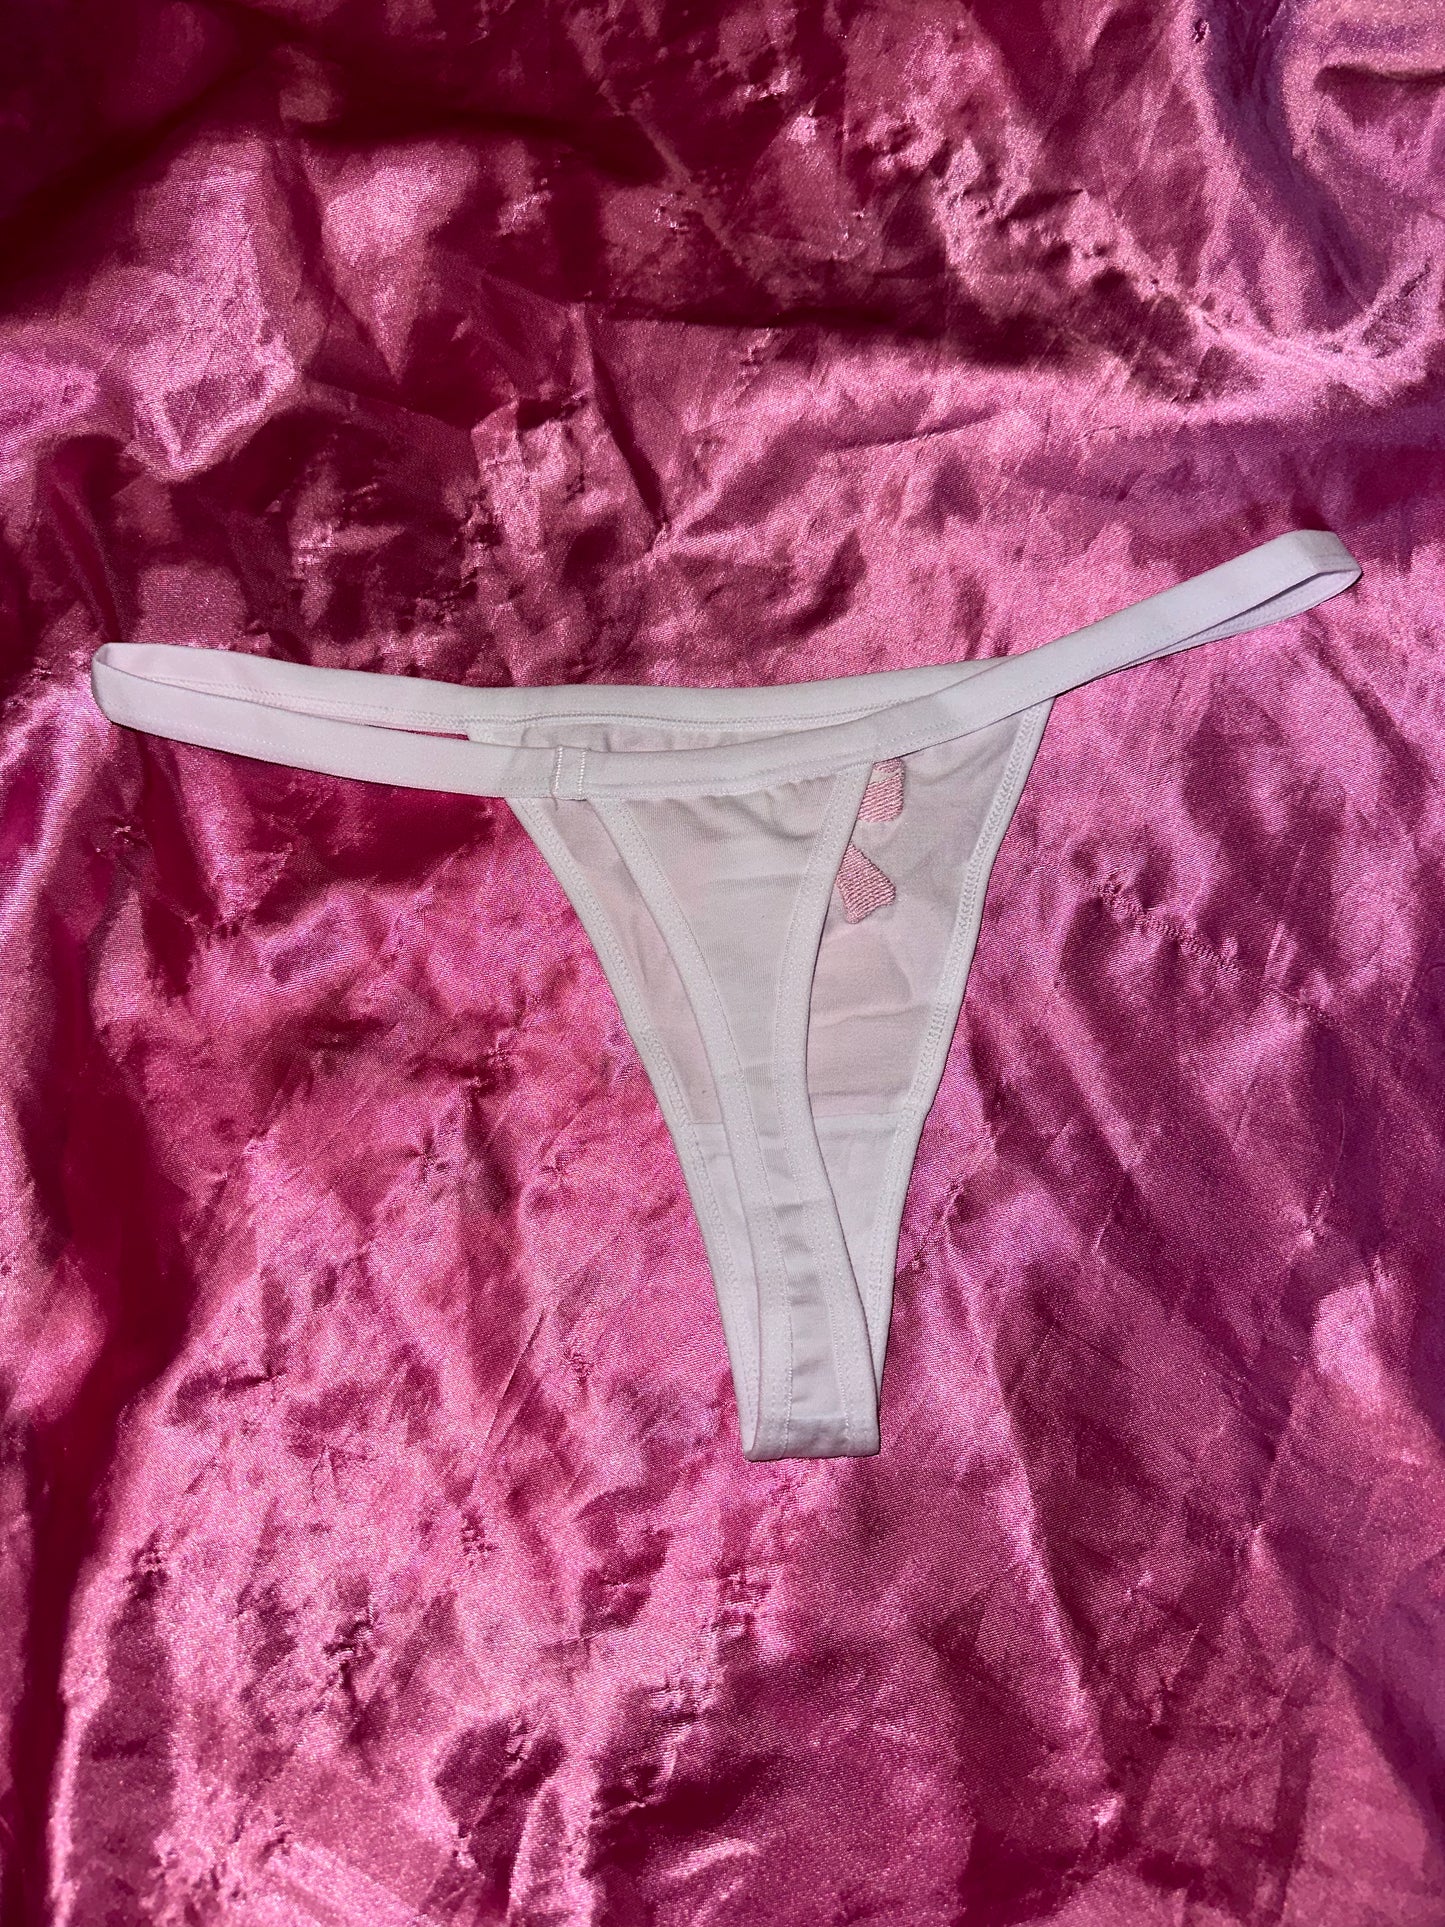 Pink Bow Coquette Thong